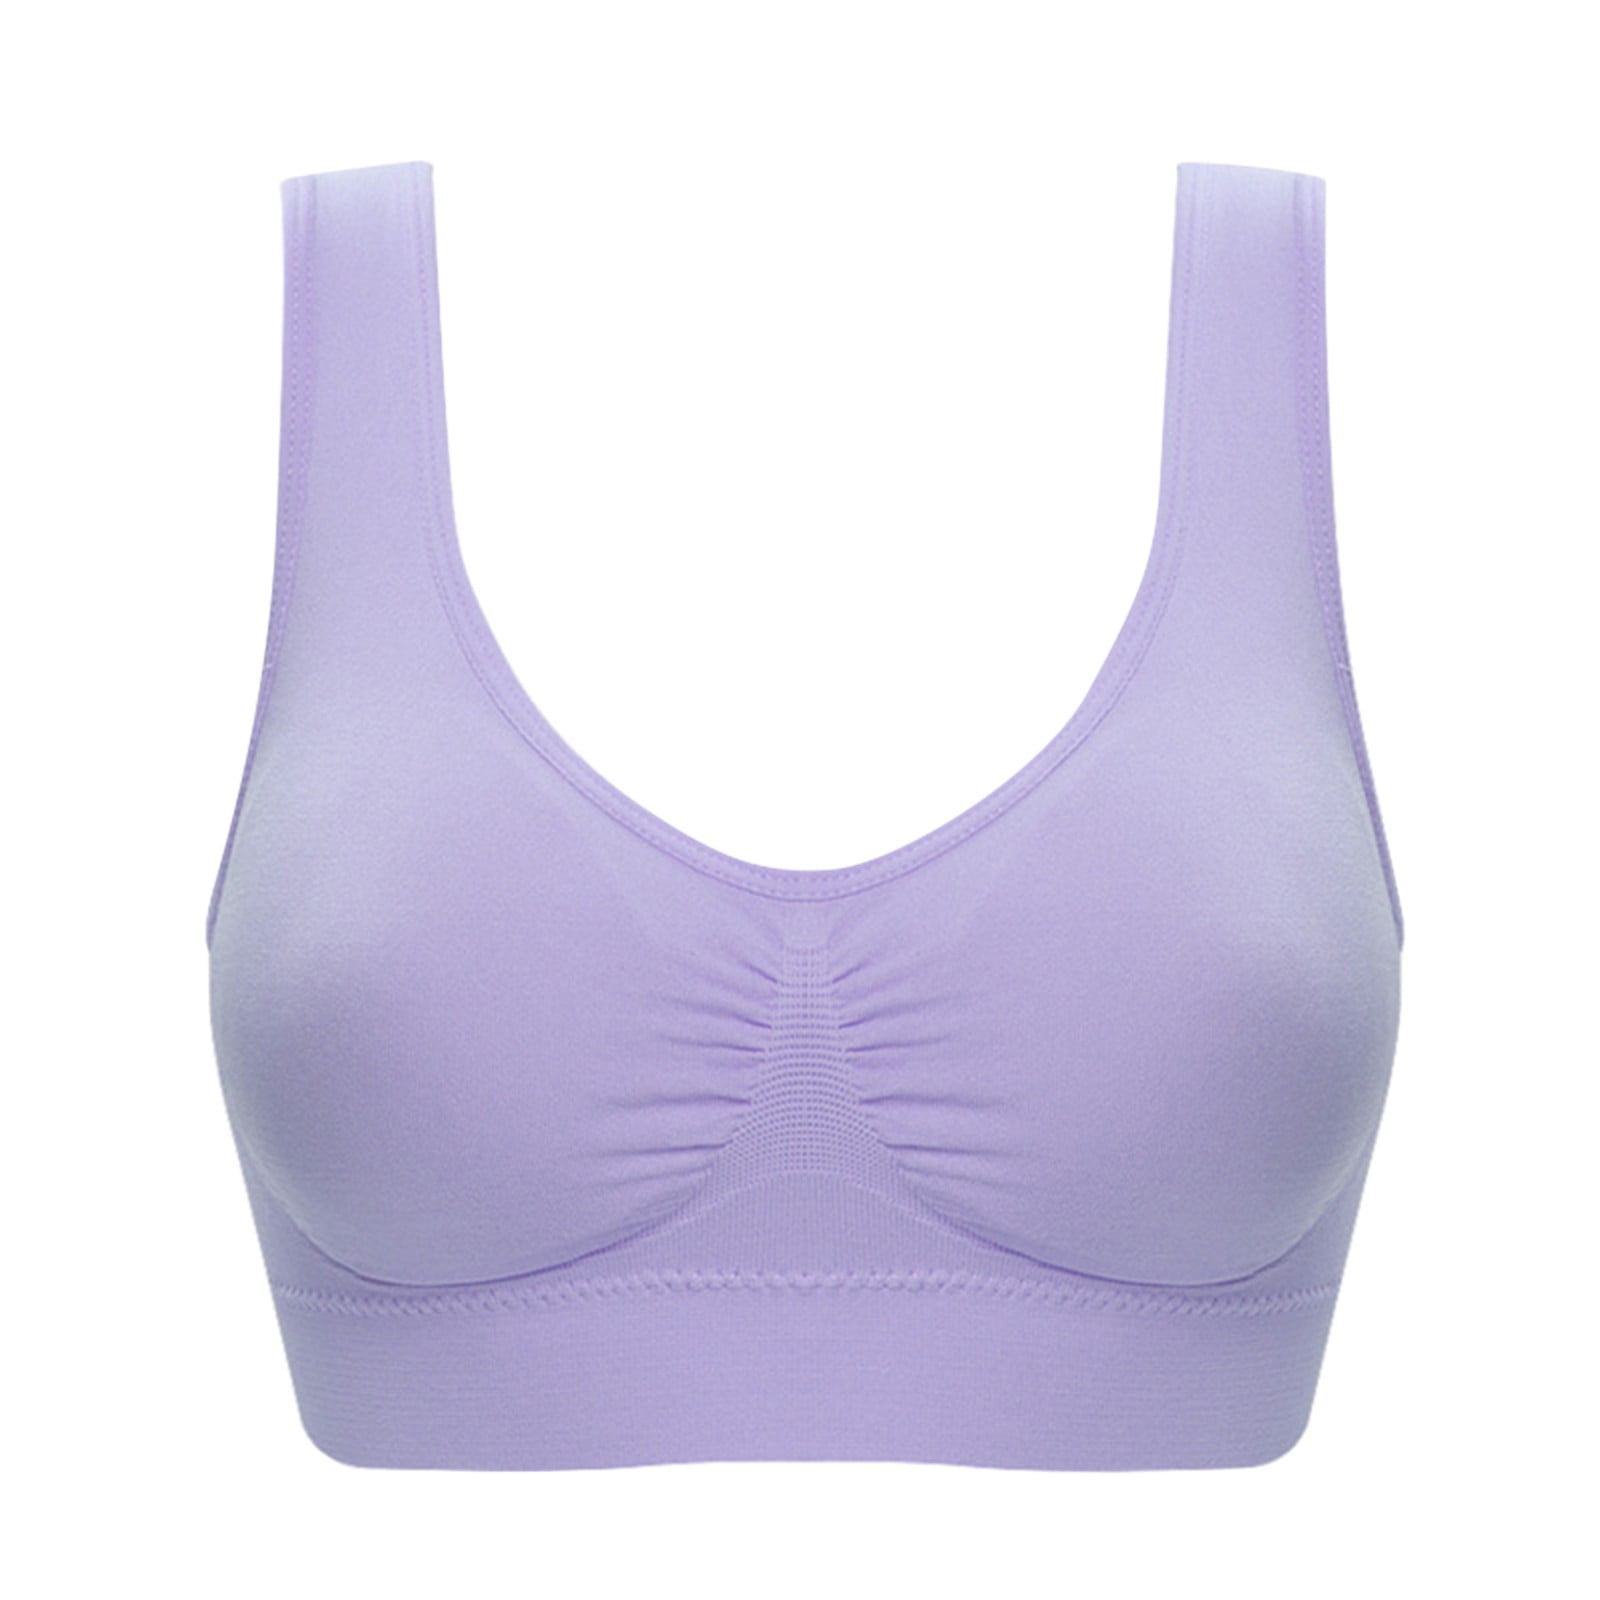 Strapless Bras for Women Push-Up Seamless Bra Solid Print Purple L 1-Pack 